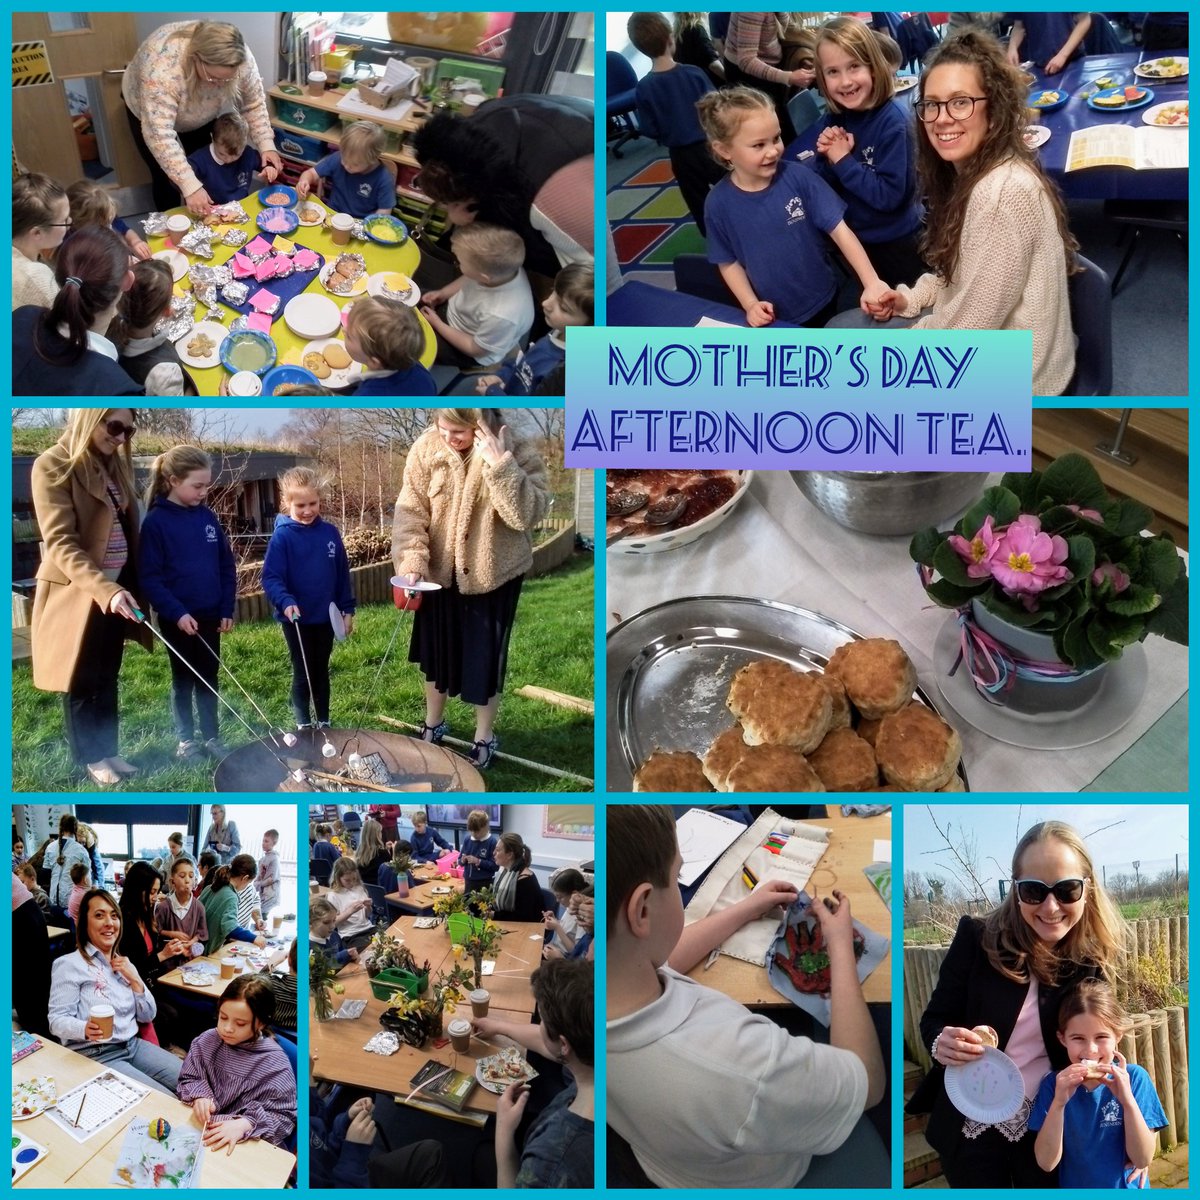 On Thursday afternoon we had 140 Mums, Grannies & Aunties coming to have a lovely cream tea & spend time in the classroom with their children! Activities included biscuit decorating, origami, campfire cooking and flower arranging - to name but a few! Many thanks to all who came.